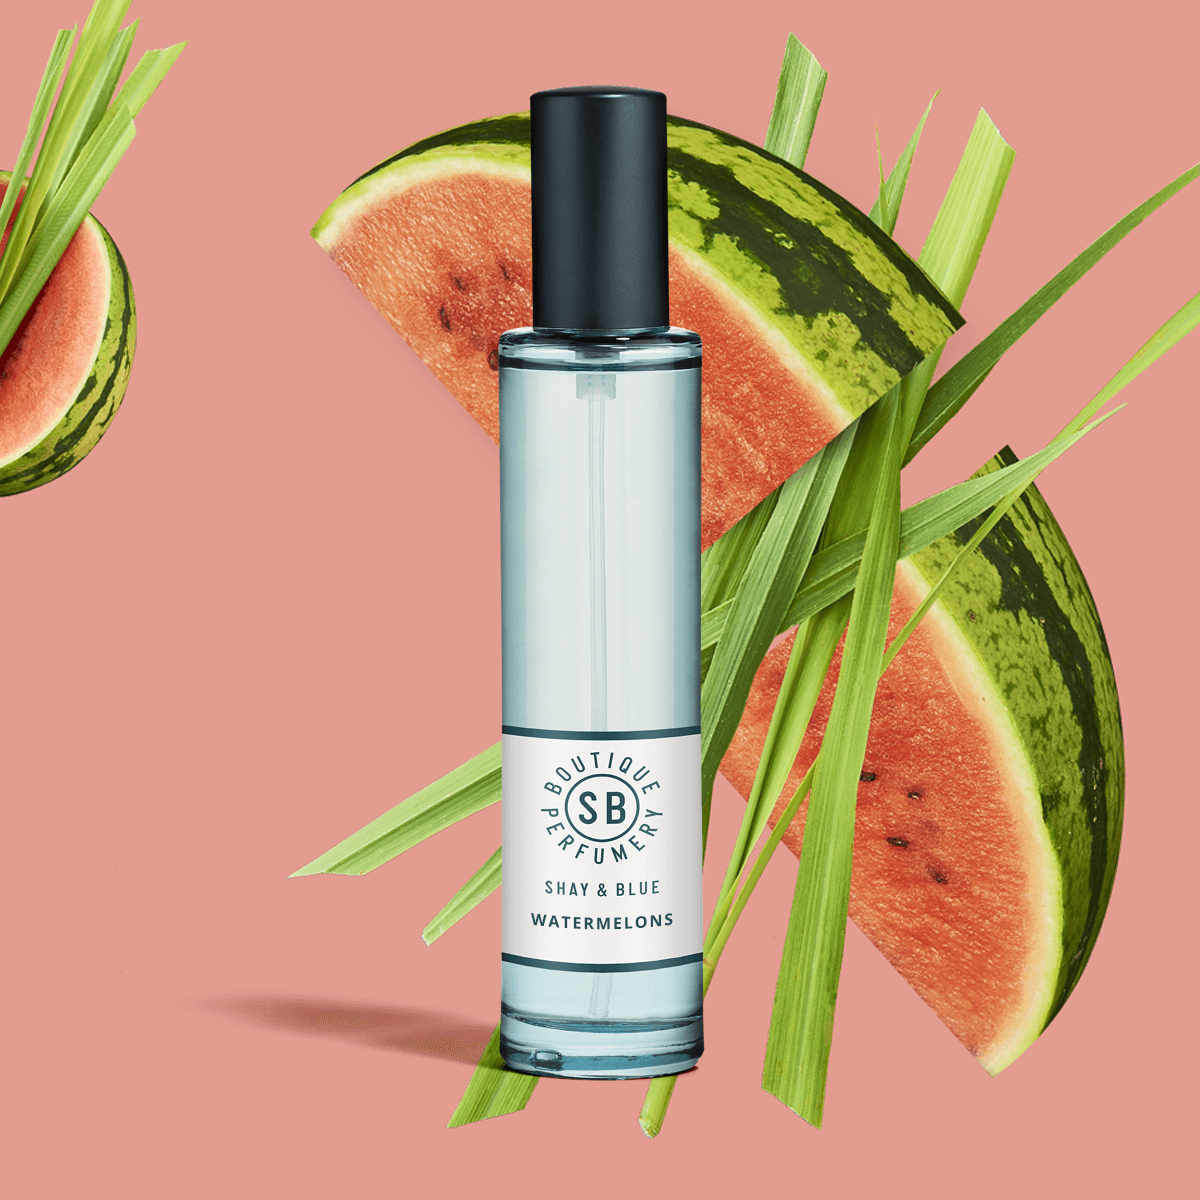 Watermelons Fragrance 30ml | Watermelon freshness with green mandarin and cut grass. | Clean All Gender Fragrance | Shay & Blue